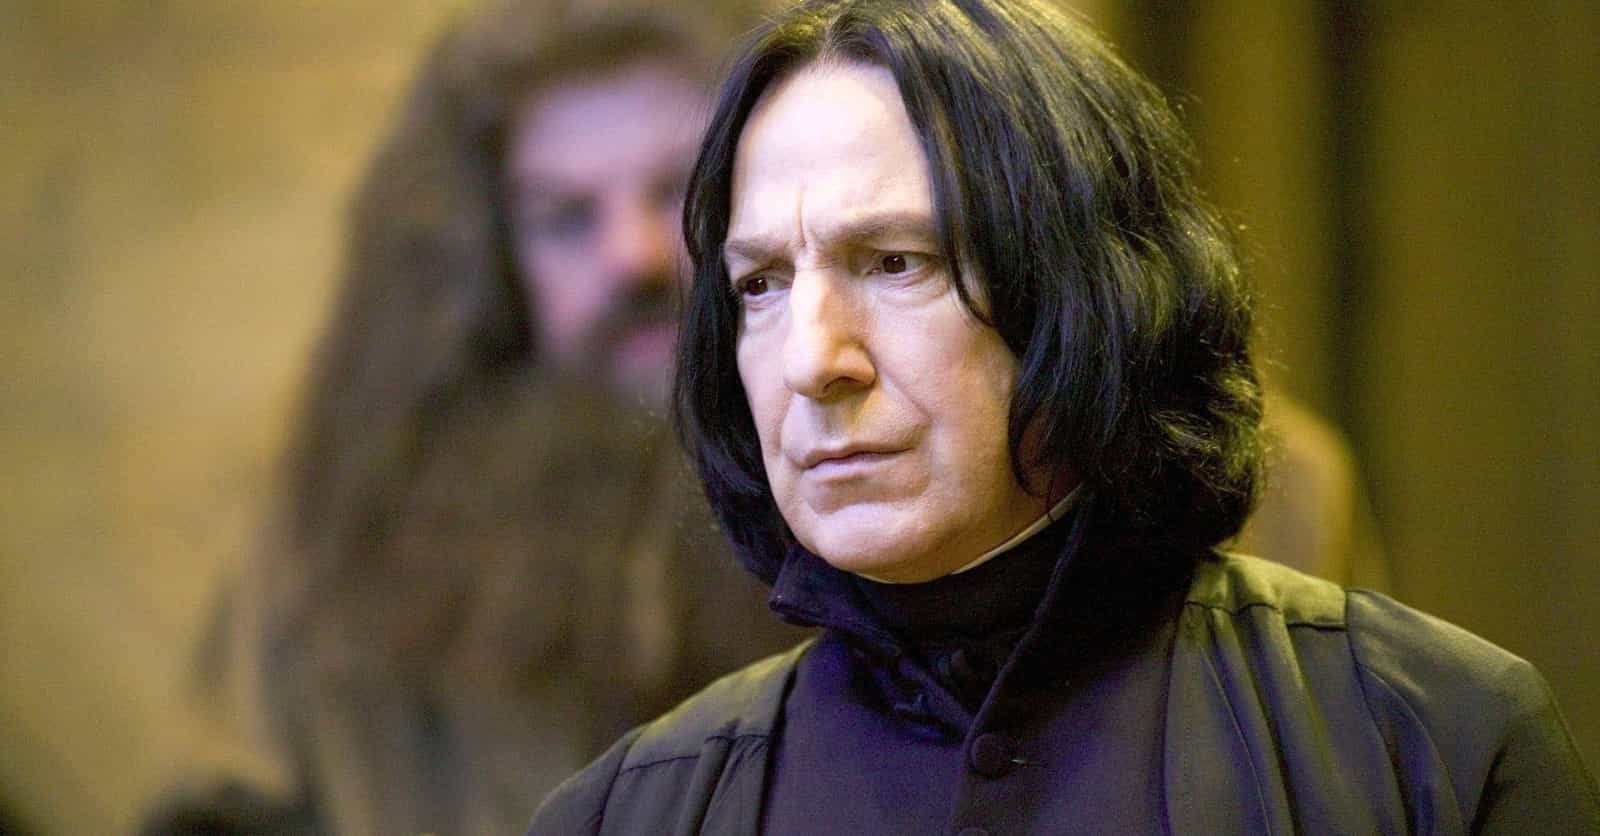 Fans Are Reacting To Sweet And Sad Memories About Alan Rickman From 'Harry Potter'